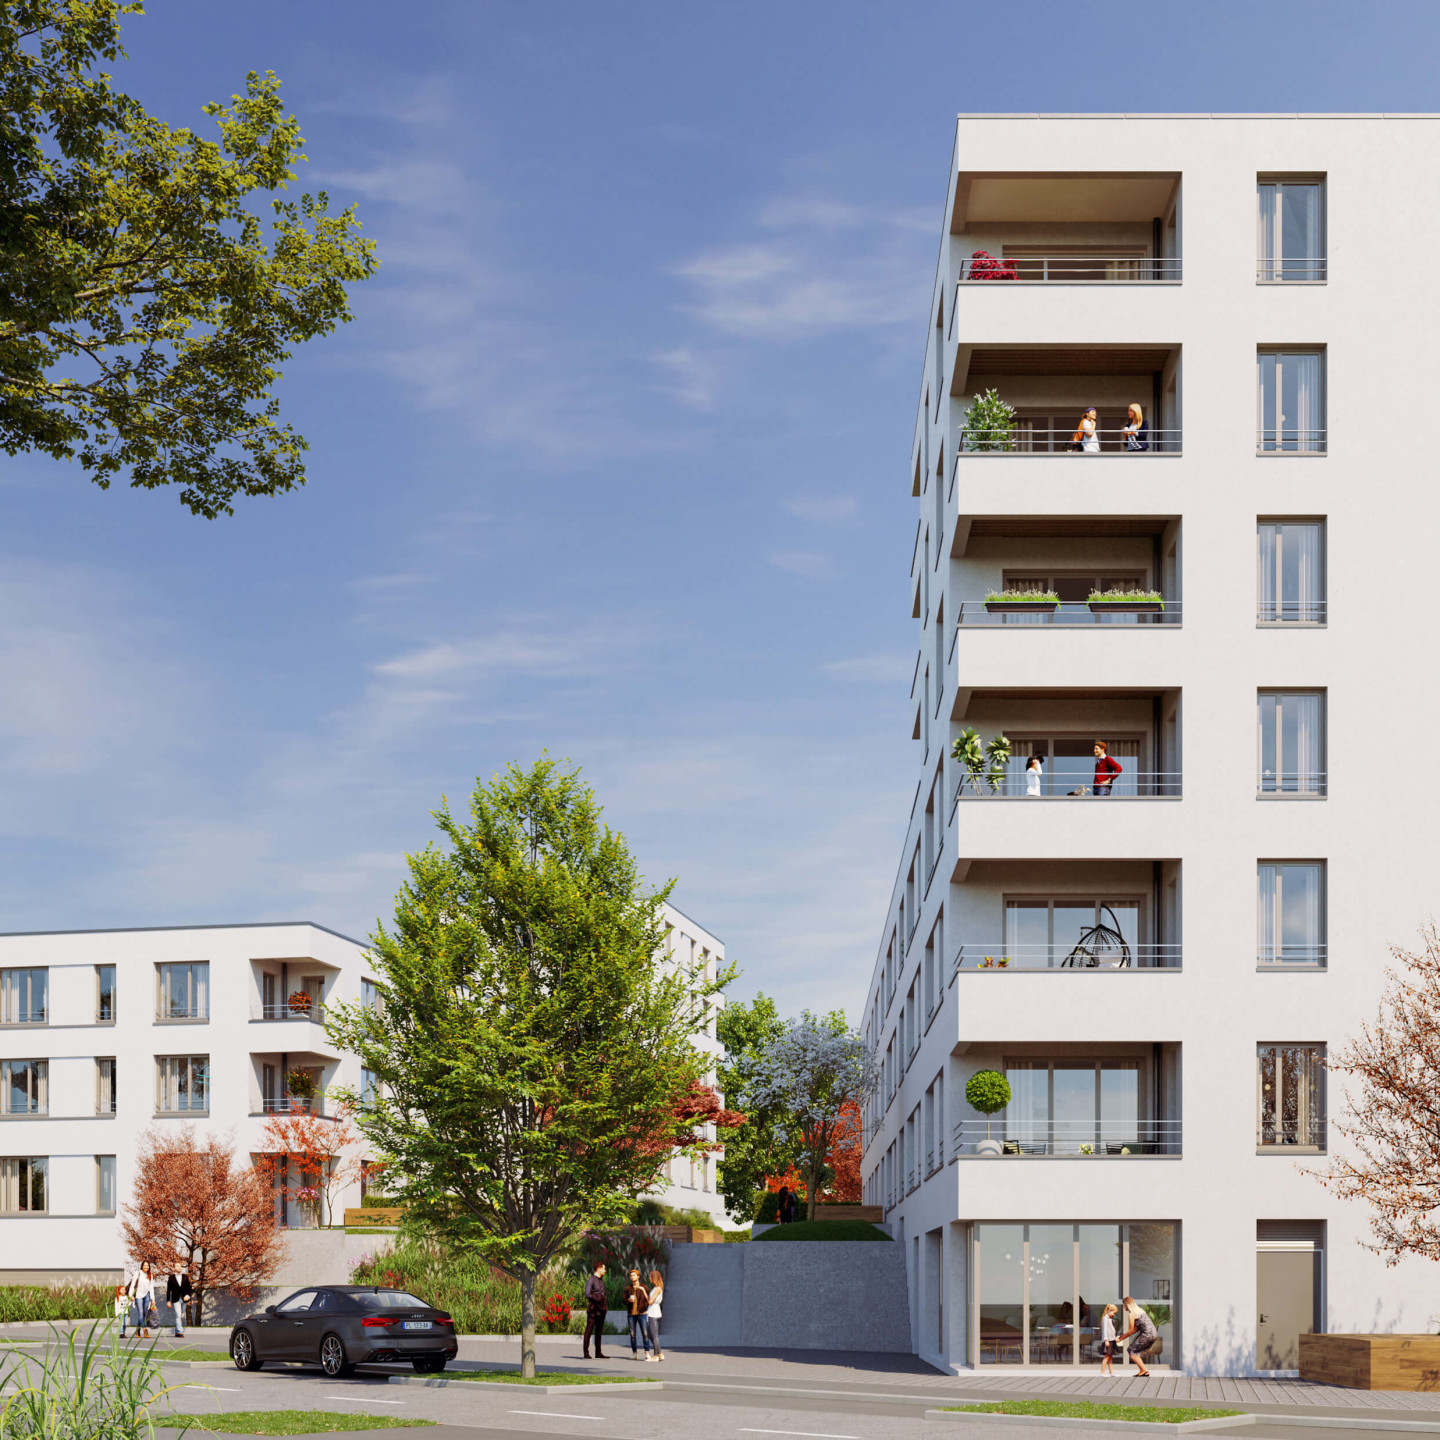 Image: Luc & Lena: Modern residential complex with green area in Belval, Luxembourg